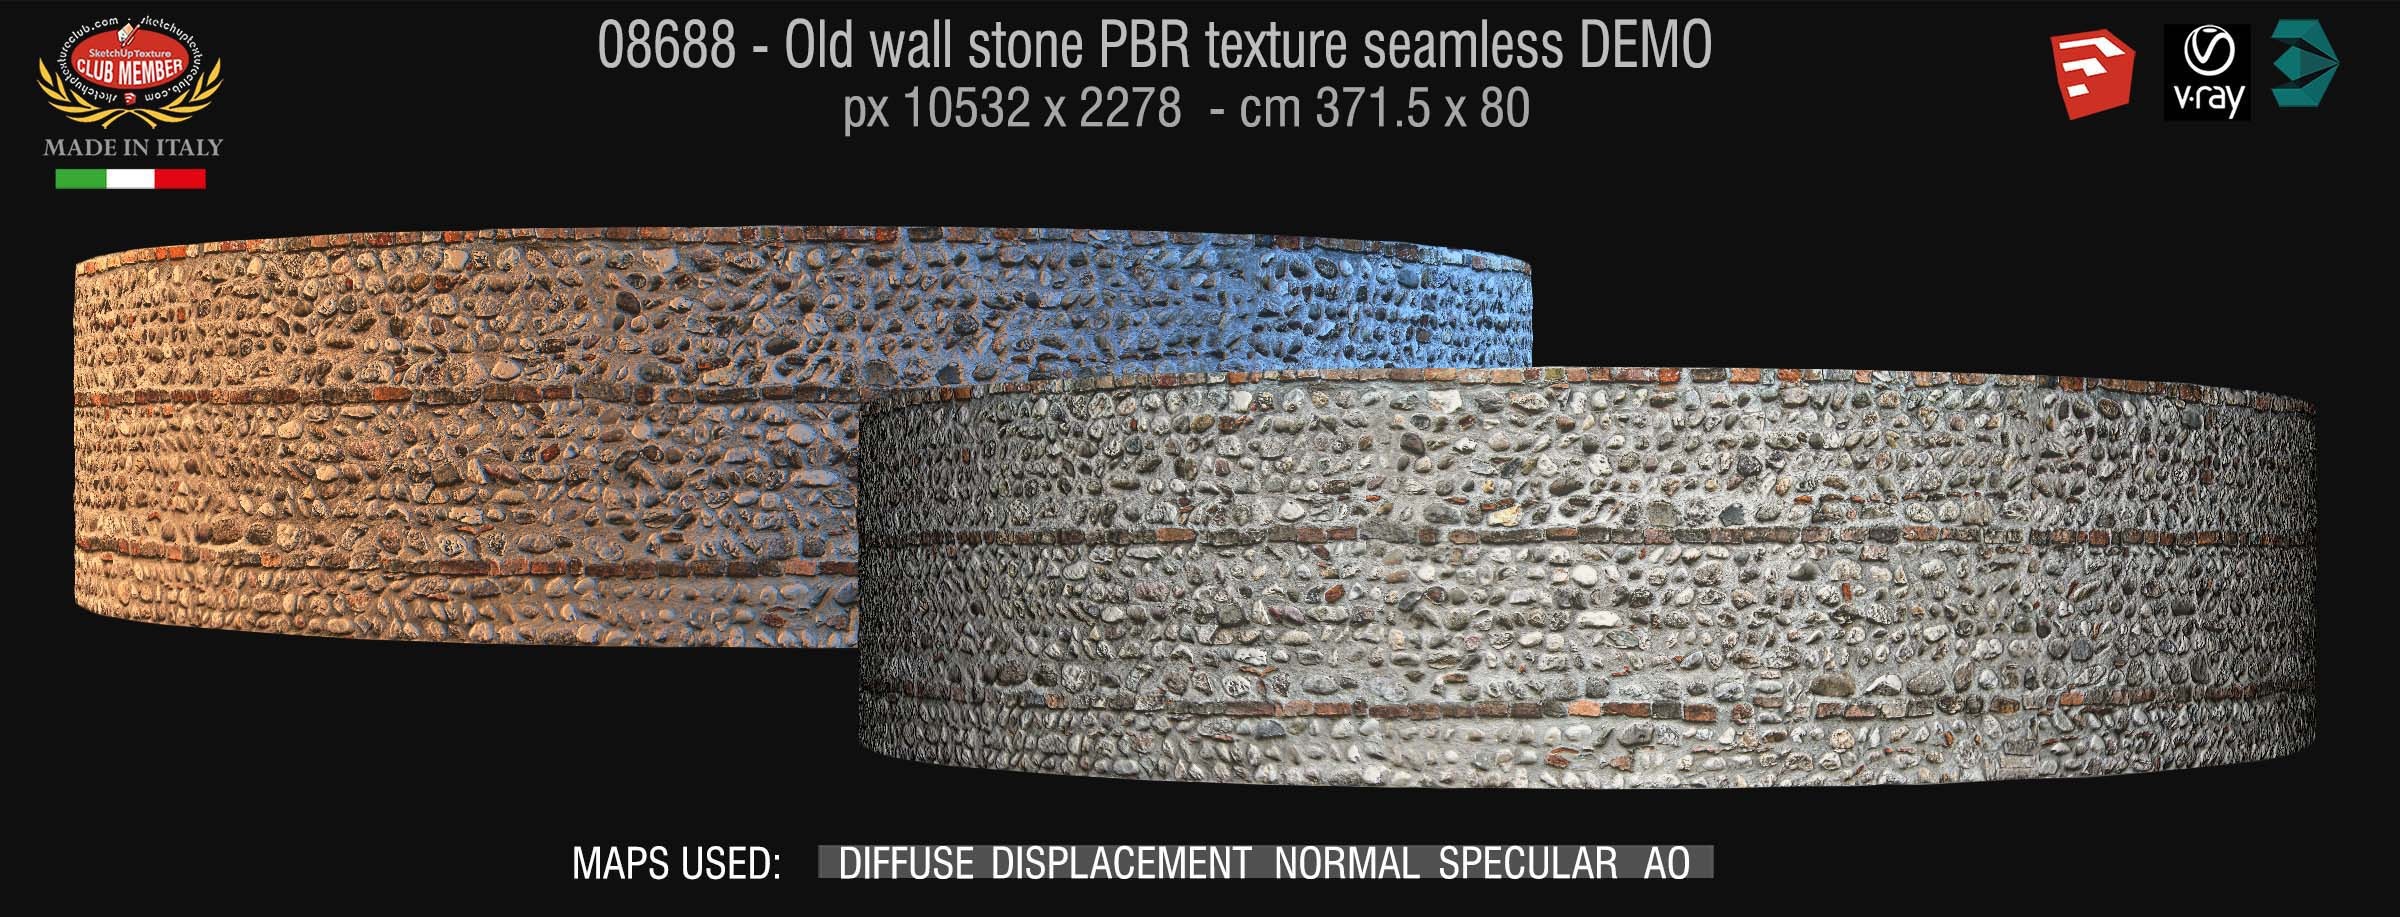 08688 Old wall stone PBR texture seamless DEMO